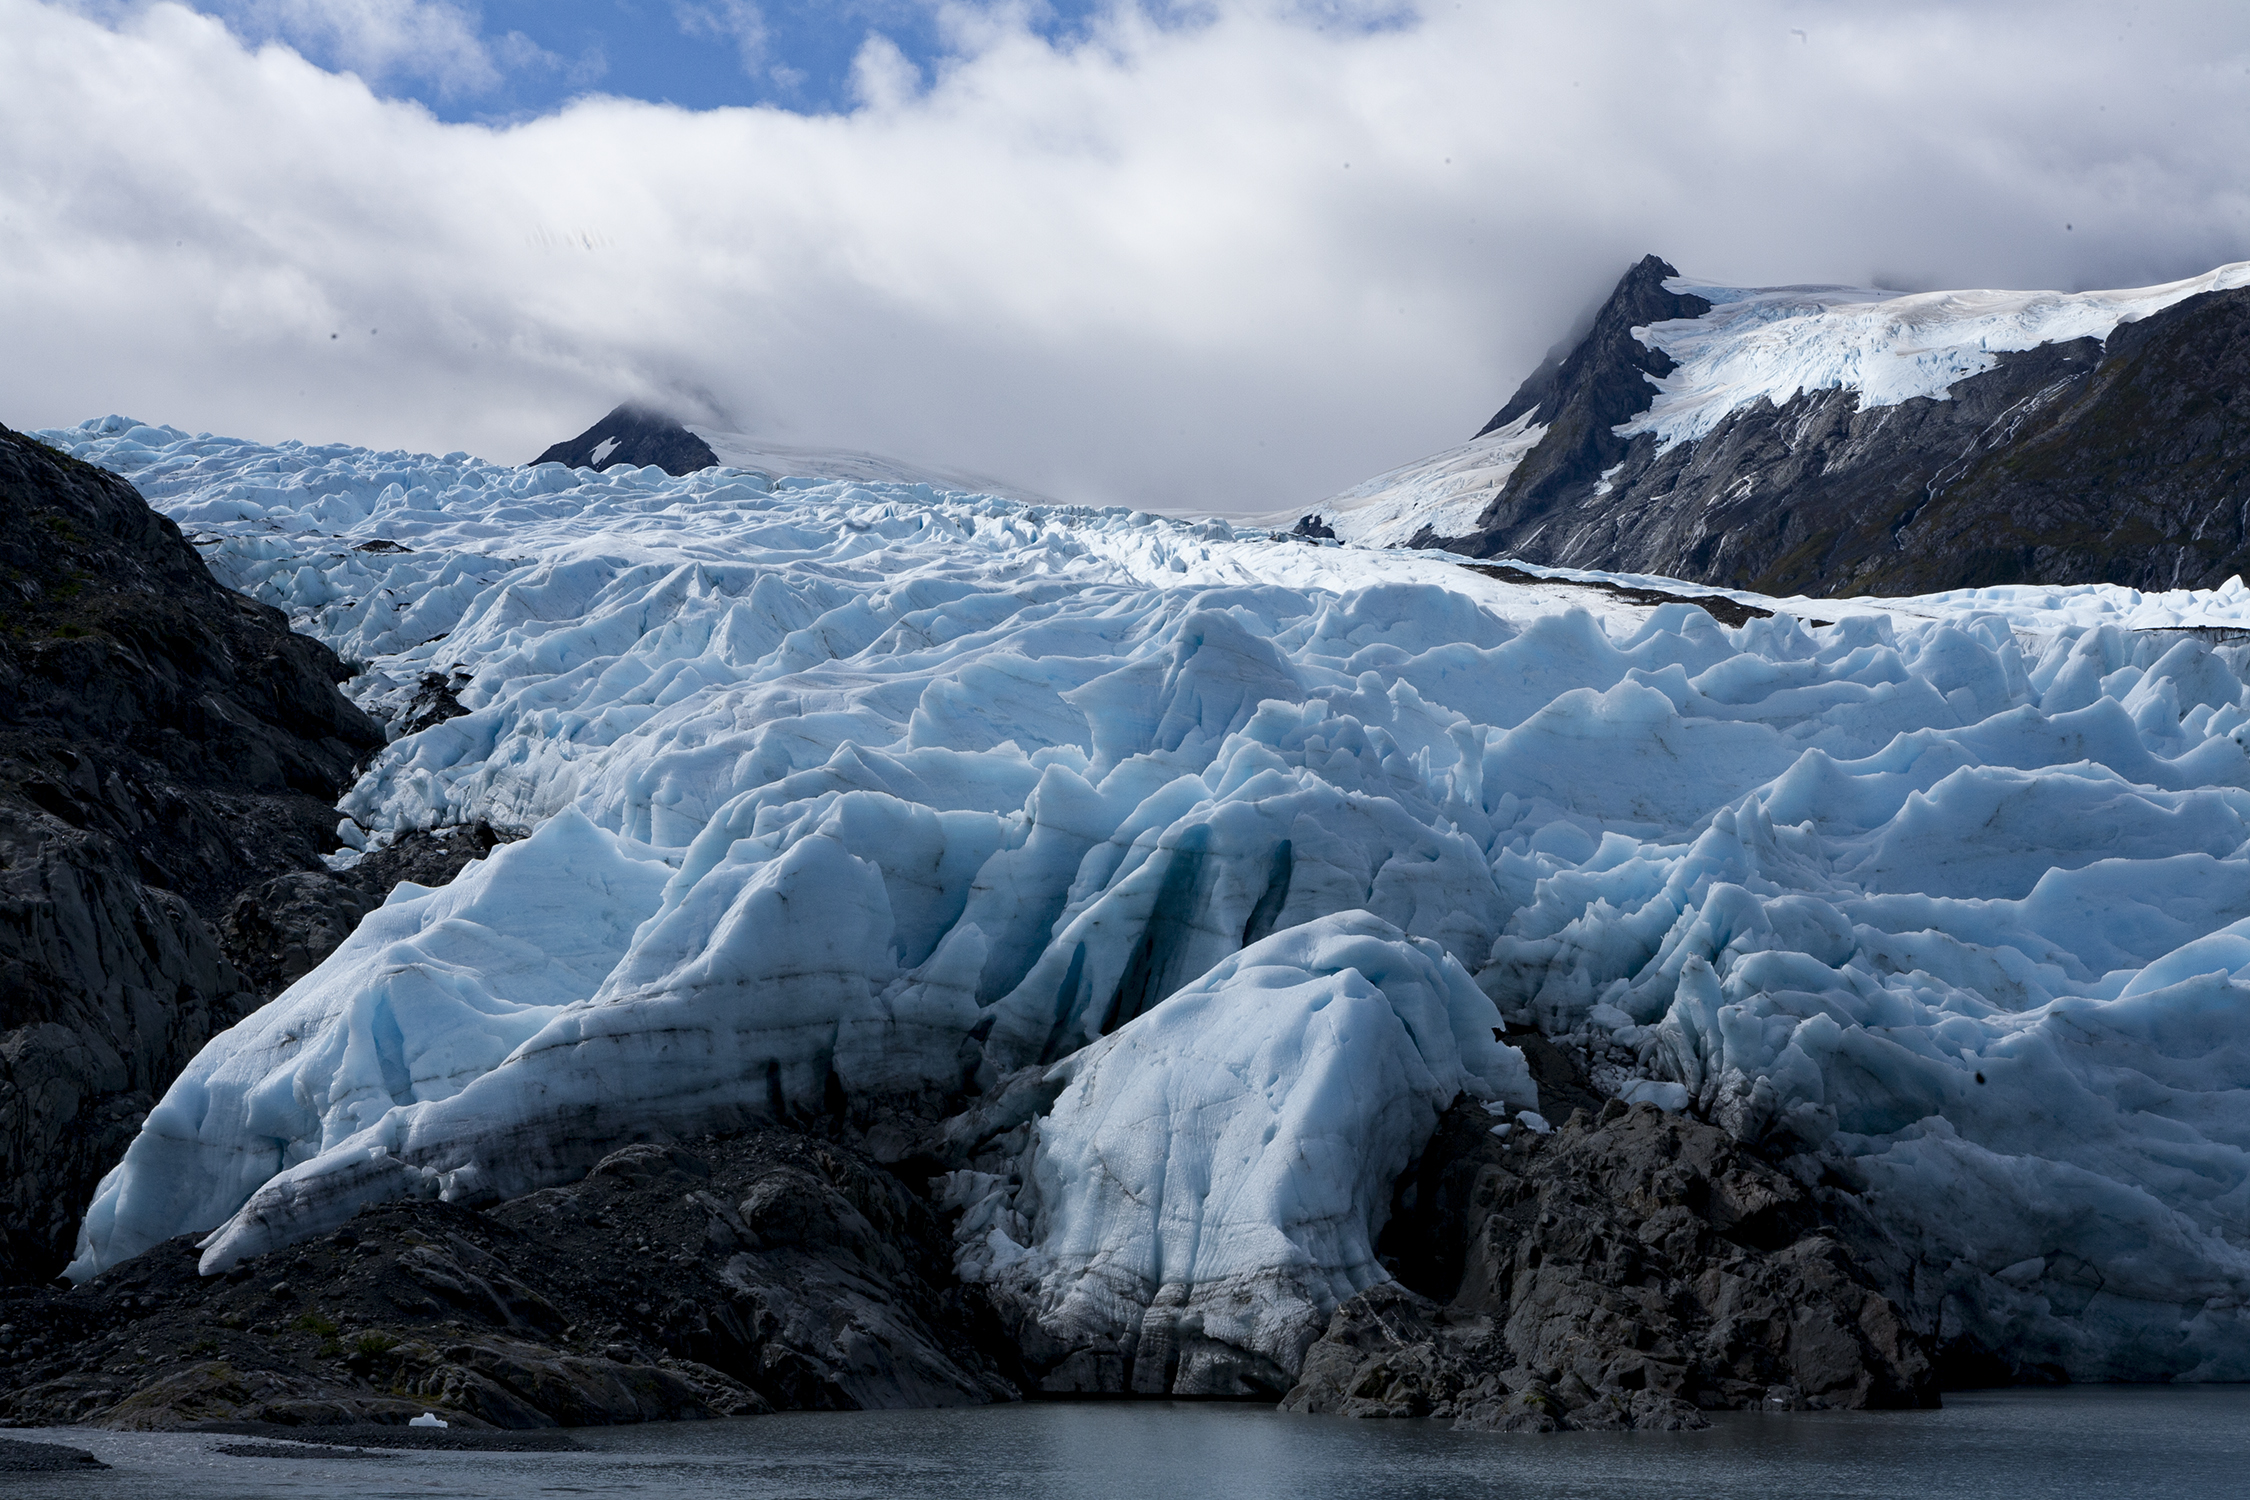  &nbsp;Portage Glacier has advanced and retreated over the years, due to climatic fluctuations. Moraines or large piles of rock and debris are deposited by glaciers as they flow down, or retreat from valleys. © Photo by Gail Fisher&nbsp; 